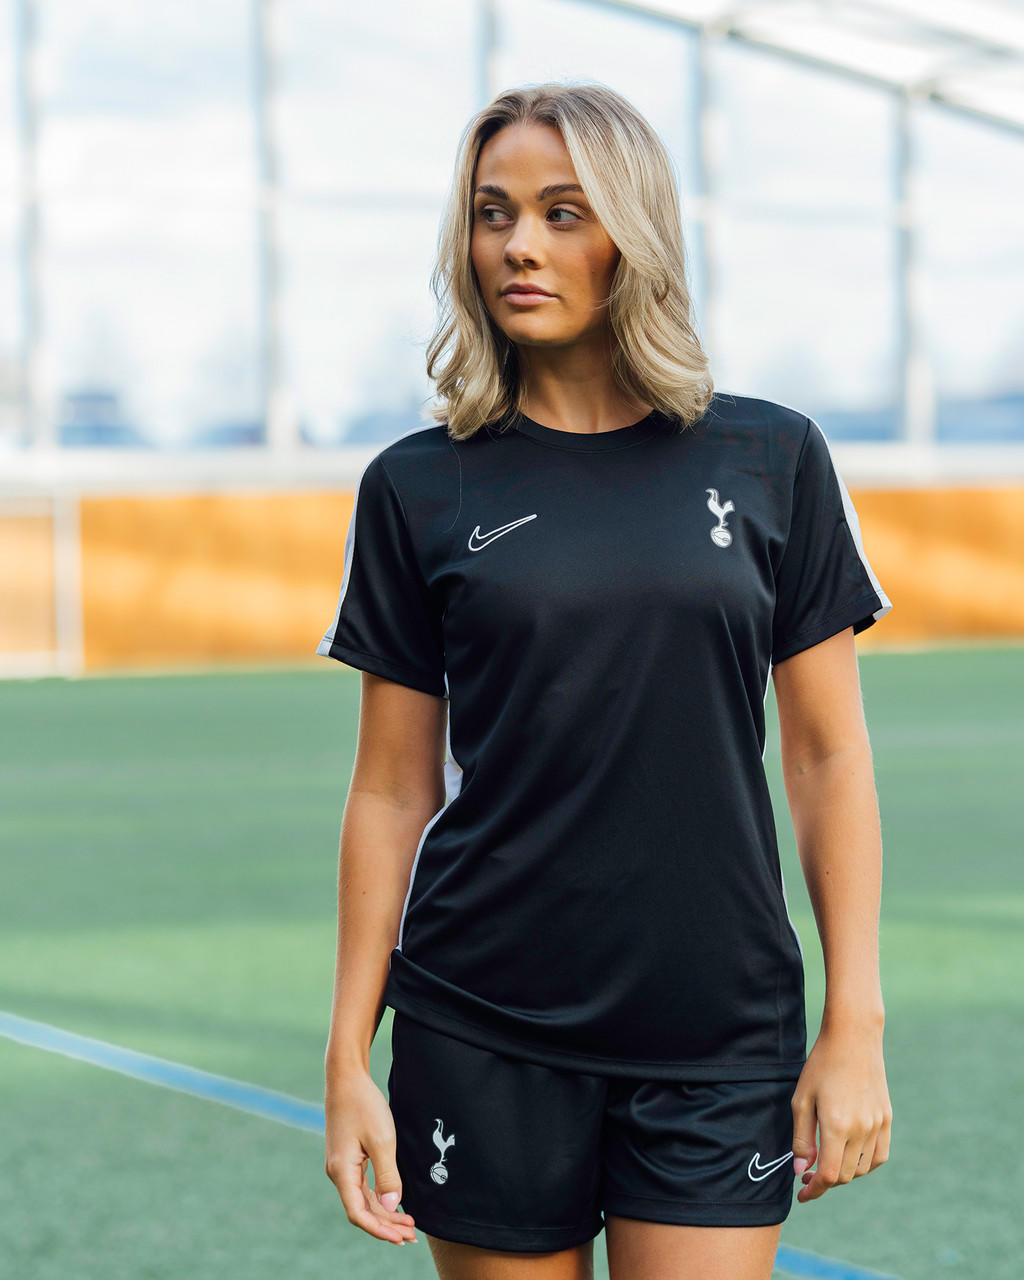 Kit Nike Academy 23 for Female. Track suit + Jersey + Shorts + Bag